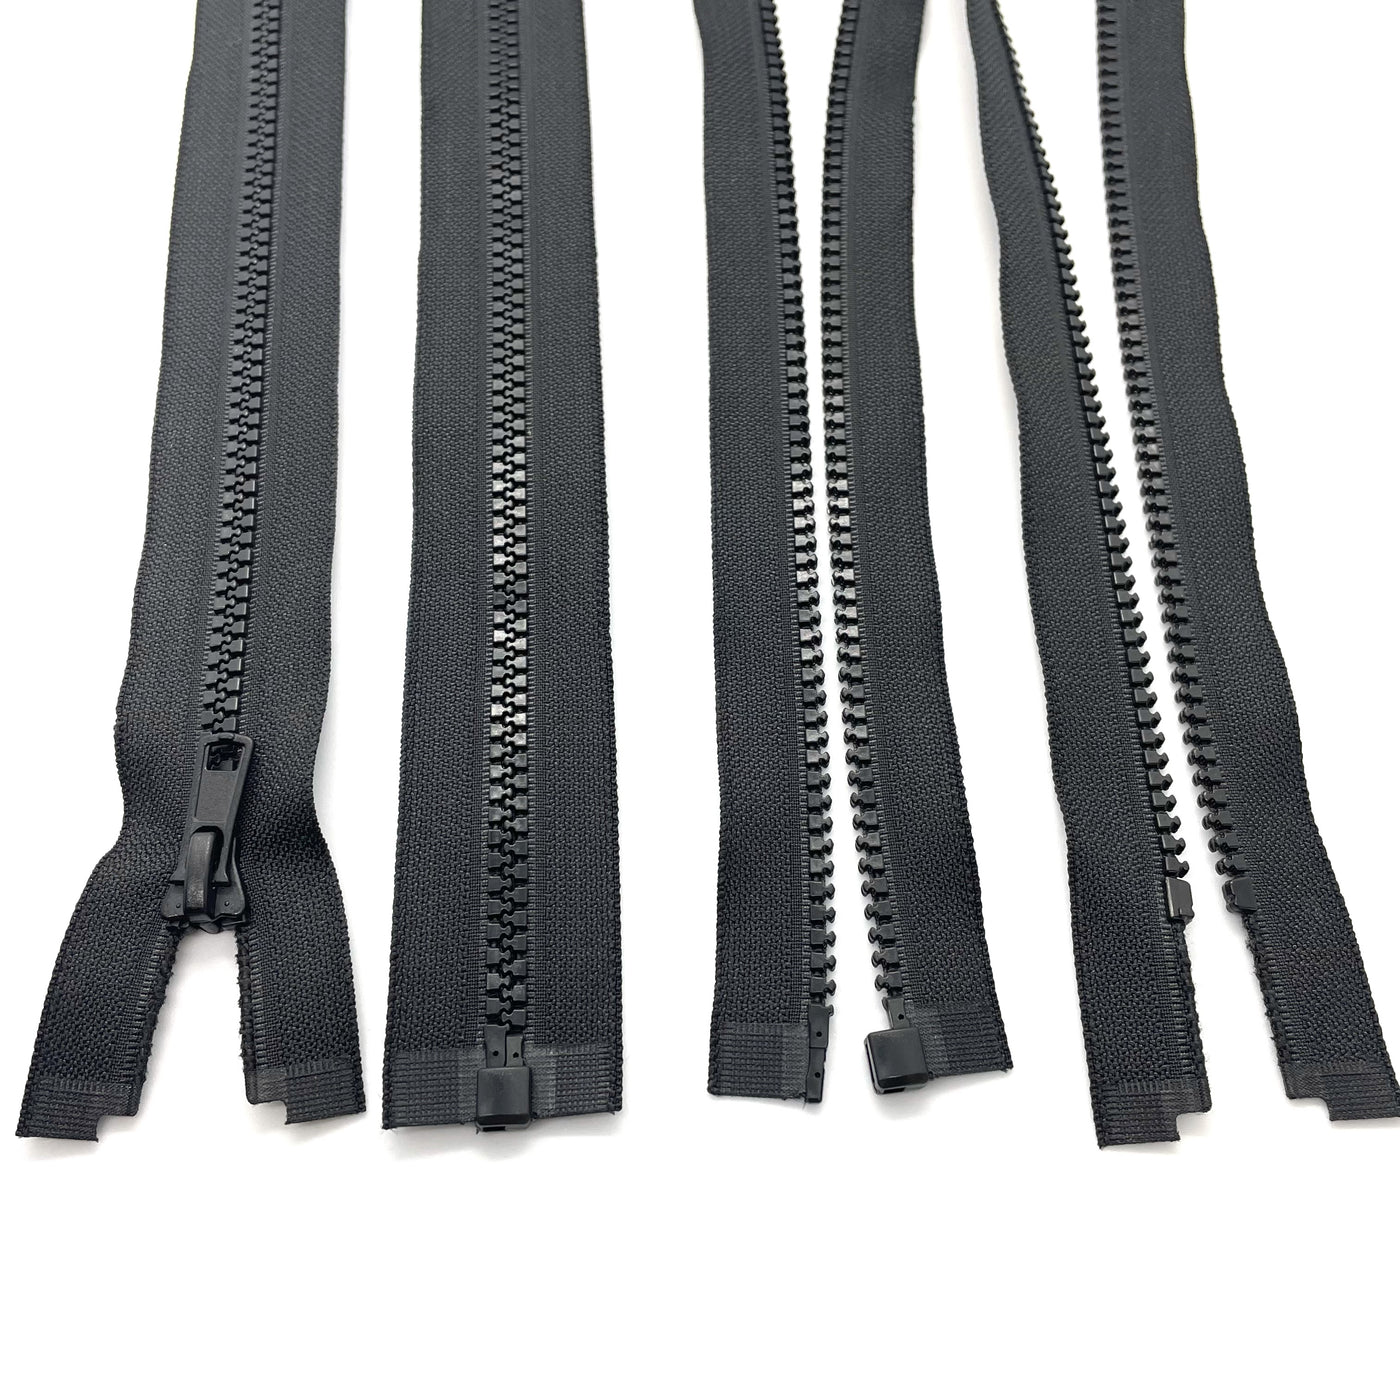 black Chunky open-ended zippers in Size 5: Robust and reliable zippers designed for heavy-duty applications. The chunky design ensures durability and strength, suitable for projects requiring sturdy closures. With open-ended functionality, they offer accessibility and ease of use for jackets, bags, and outdoor gear. Size 5 provides ample width for secure fastening, making these zippers ideal for projects that demand both style and substance.